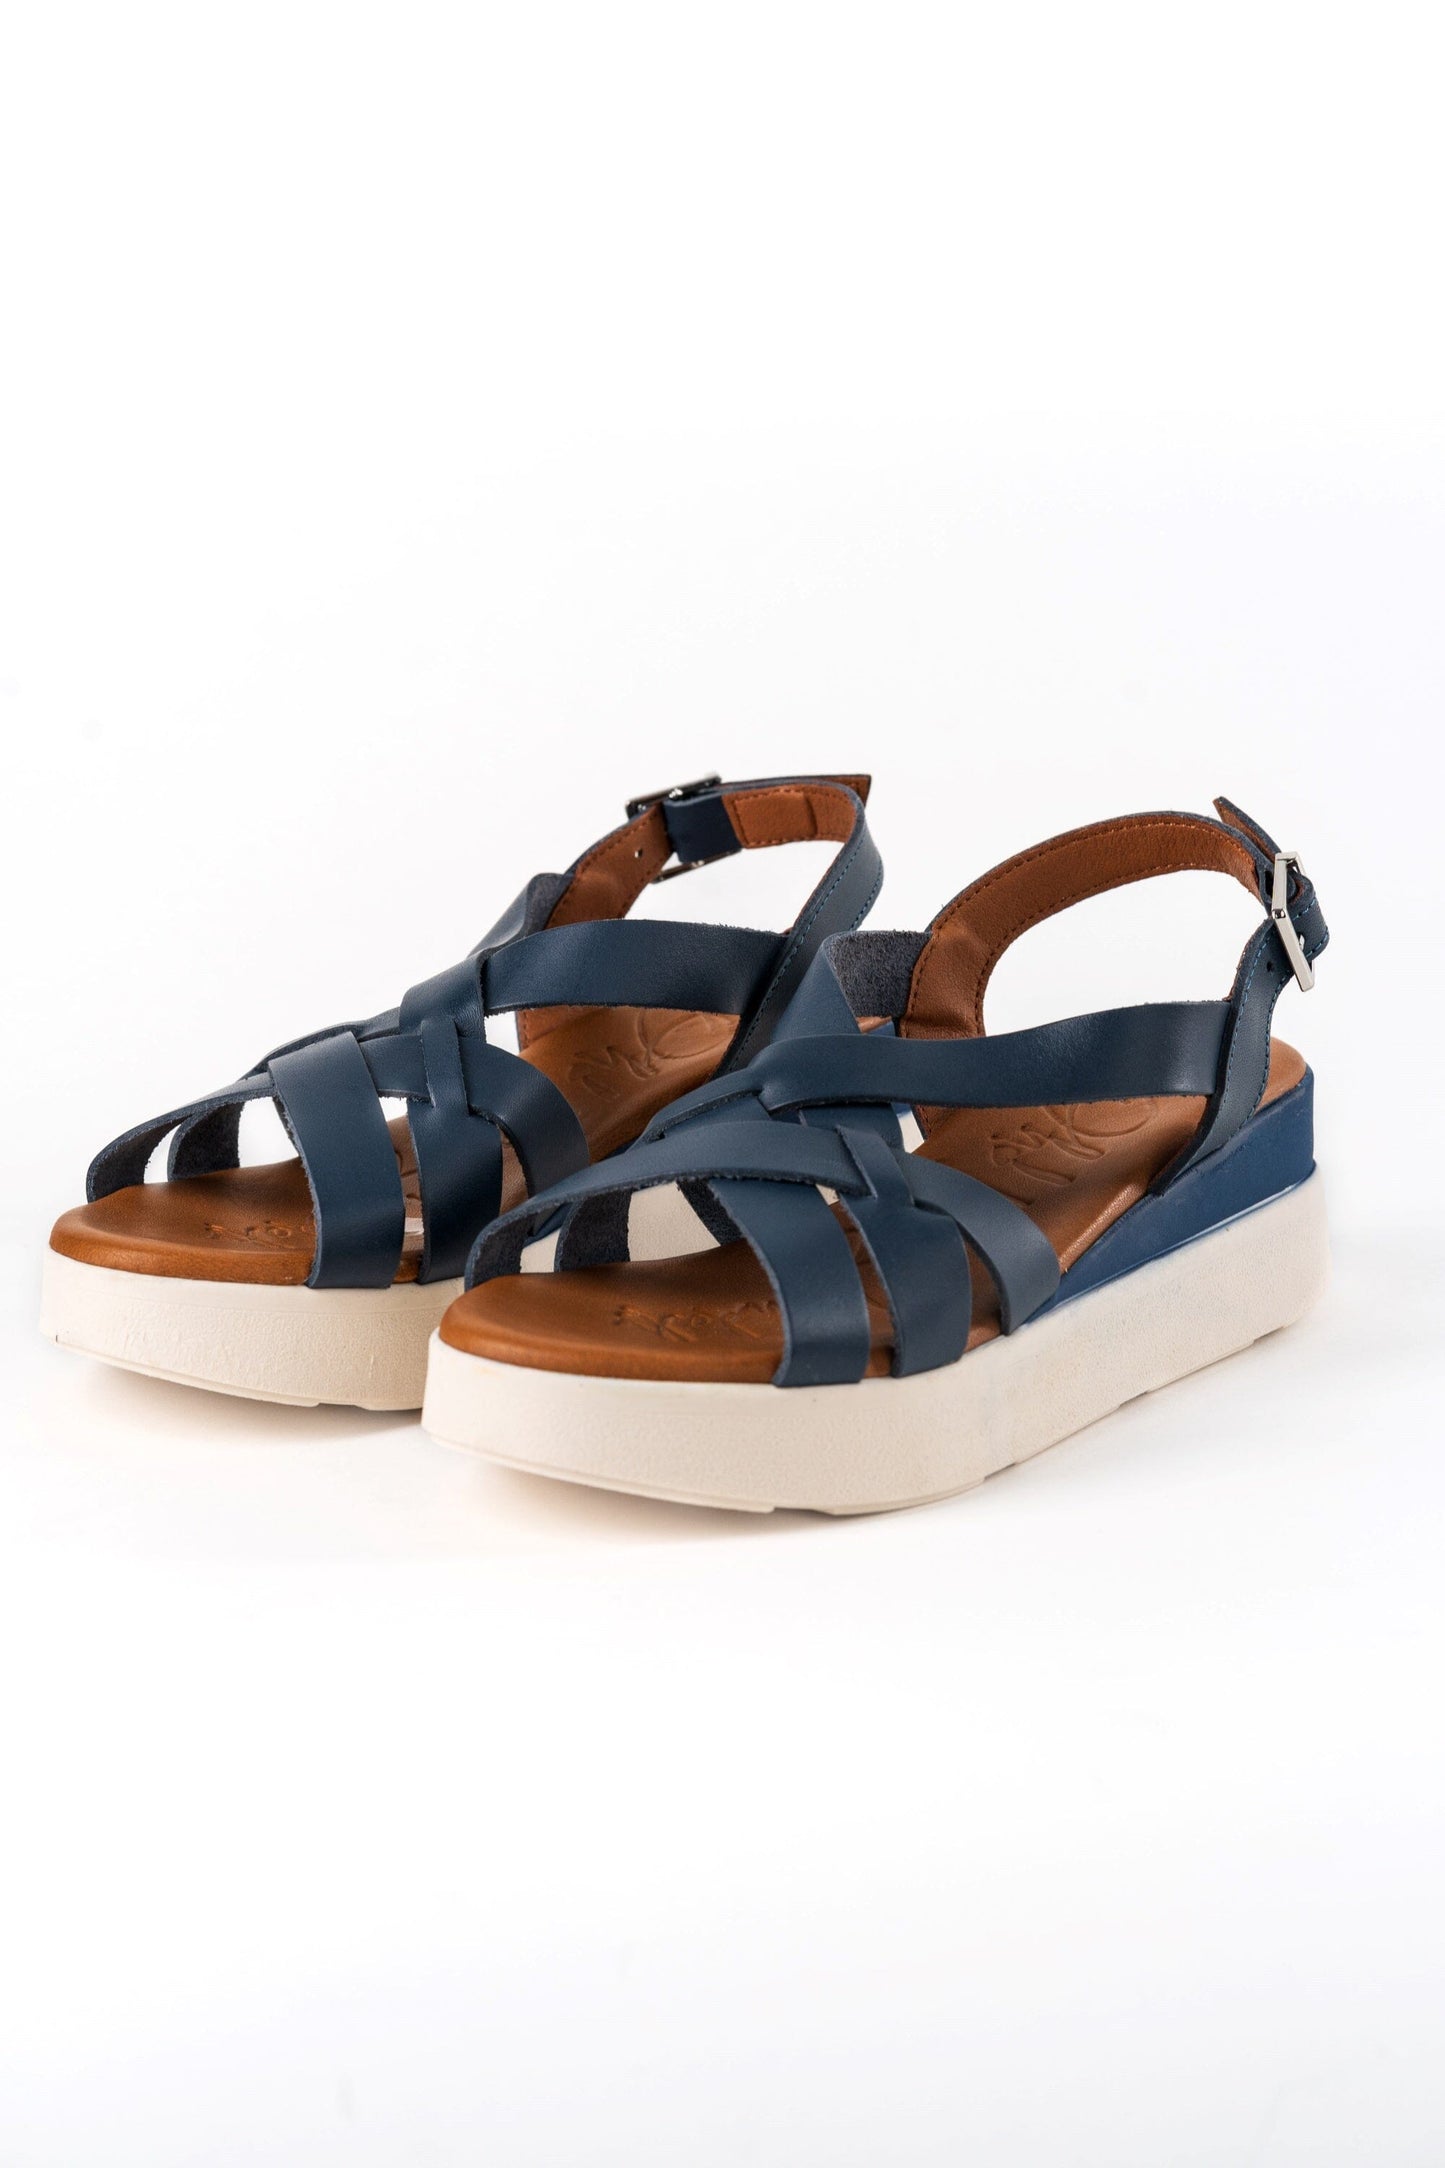 5188 Spanish leather crossed strappy sandals/wedge in Tan and Navy sandals Sam Star Shoes Navy 38/5 